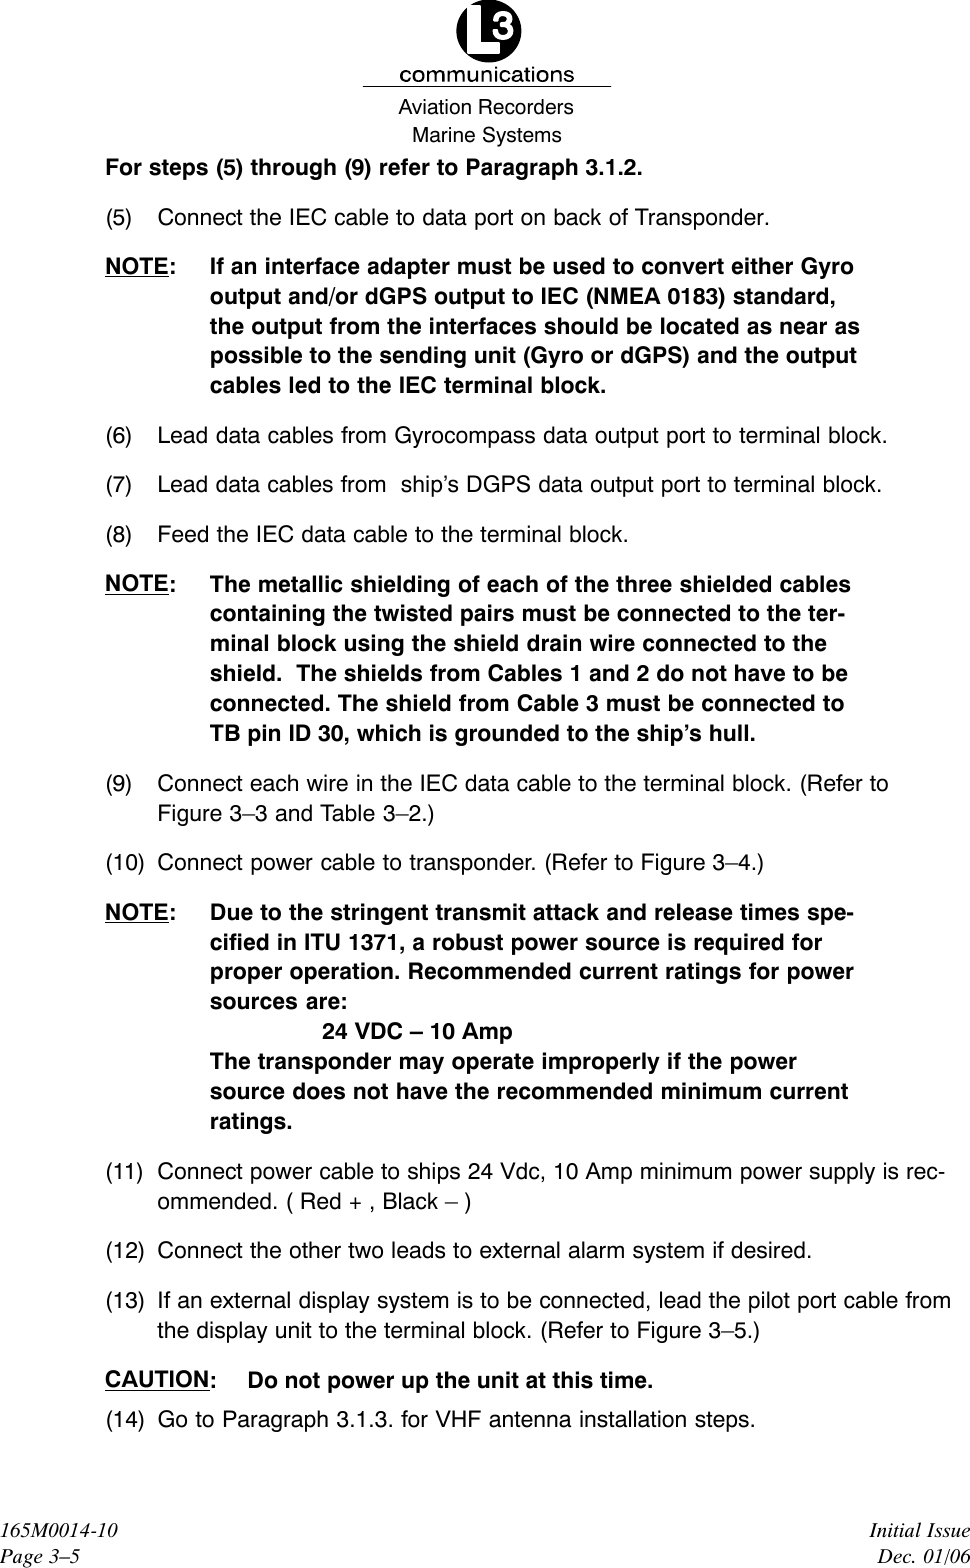 Marine SystemsAviation RecordersInitial IssueDec. 01/06165M0014-10Page 3–5For steps (5) through (9) refer to Paragraph 3.1.2.(5) Connect the IEC cable to data port on back of Transponder.NOTE: If an interface adapter must be used to convert either Gyrooutput and/or dGPS output to IEC (NMEA 0183) standard,the output from the interfaces should be located as near aspossible to the sending unit (Gyro or dGPS) and the outputcables led to the IEC terminal block.(6) Lead data cables from Gyrocompass data output port to terminal block.(7) Lead data cables from  ship’s DGPS data output port to terminal block.(8) Feed the IEC data cable to the terminal block.NOTE: The metallic shielding of each of the three shielded cablescontaining the twisted pairs must be connected to the ter-minal block using the shield drain wire connected to theshield.  The shields from Cables 1 and 2 do not have to beconnected. The shield from Cable 3 must be connected toTB pin ID 30, which is grounded to the ship’s hull.(9) Connect each wire in the IEC data cable to the terminal block. (Refer toFigure 3–3 and Table 3–2.)(10) Connect power cable to transponder. (Refer to Figure 3–4.)NOTE: Due to the stringent transmit attack and release times spe-cified in ITU 1371, a robust power source is required forproper operation. Recommended current ratings for powersources are:24 VDC – 10 AmpThe transponder may operate improperly if the powersource does not have the recommended minimum currentratings.(11) Connect power cable to ships 24 Vdc, 10 Amp minimum power supply is rec-ommended. ( Red + , Black – )(12) Connect the other two leads to external alarm system if desired.(13) If an external display system is to be connected, lead the pilot port cable fromthe display unit to the terminal block. (Refer to Figure 3–5.)CAUTION: Do not power up the unit at this time.(14) Go to Paragraph 3.1.3. for VHF antenna installation steps.